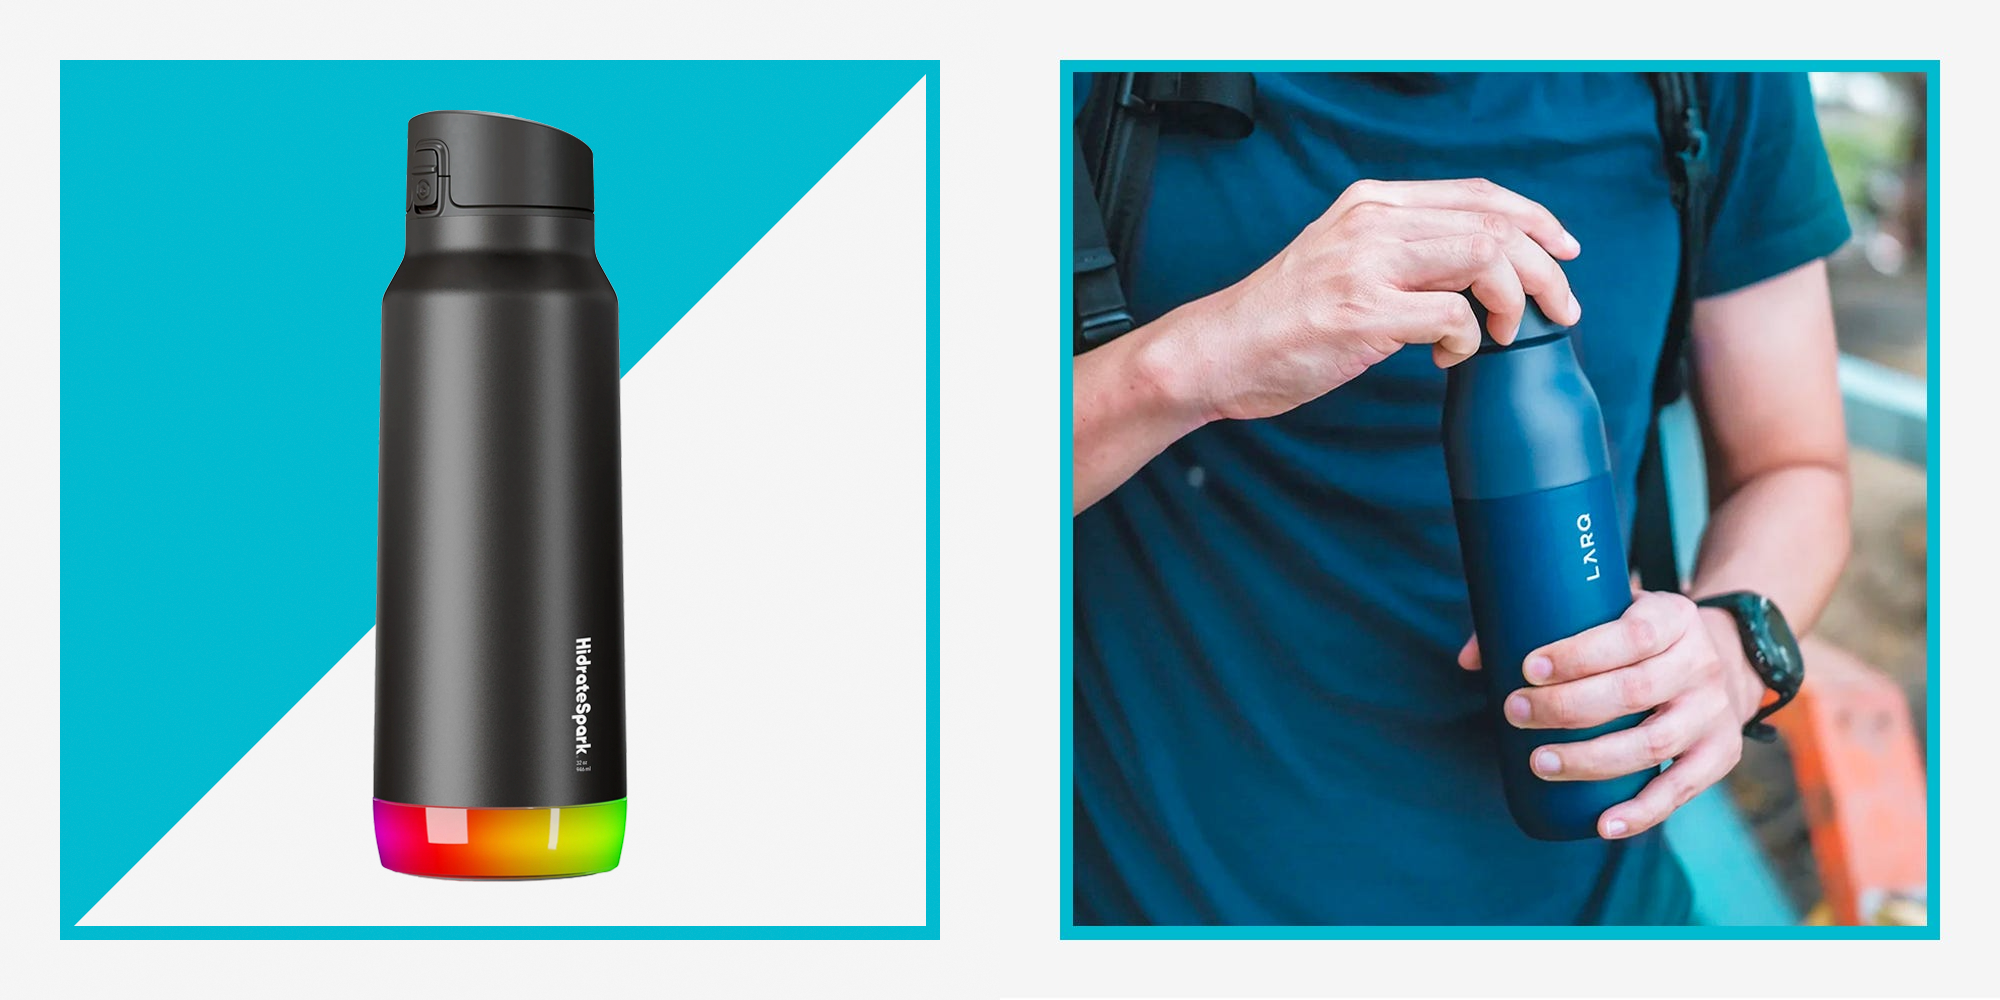 3-in-1 Insulated Smart Water Bottle(Glows to Remind You to Stay Hydrated)